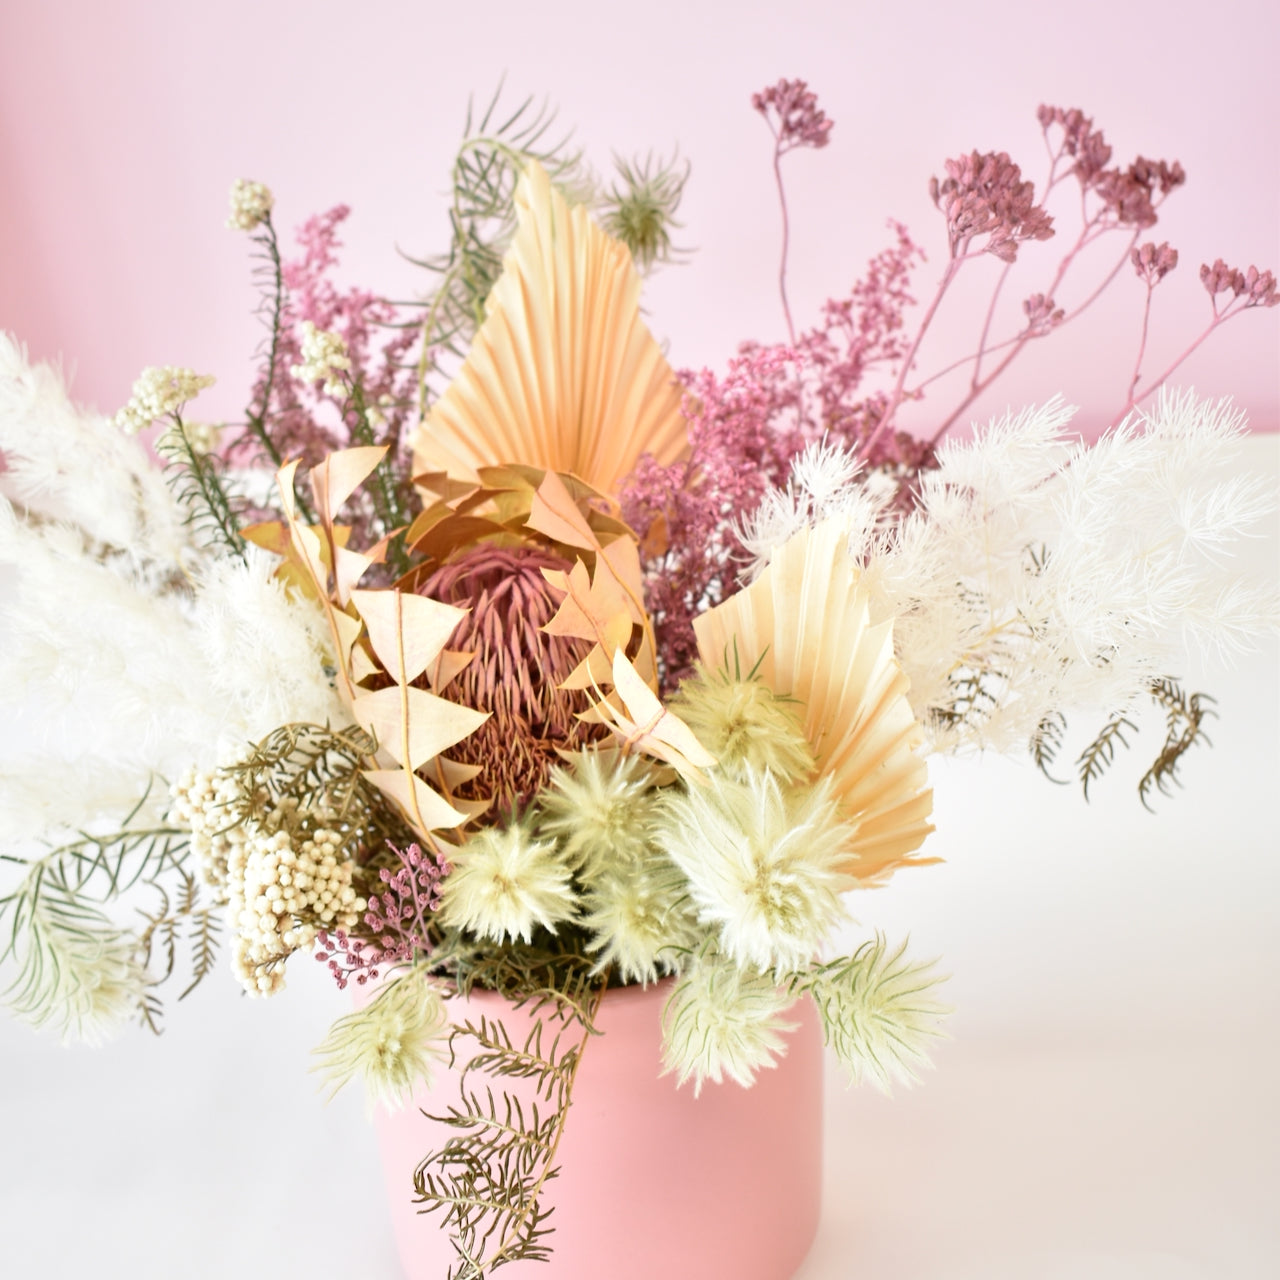 Dried flower arrangement in a pink ceramic pot. Colours of cream, white, peach and pink, designed by florist